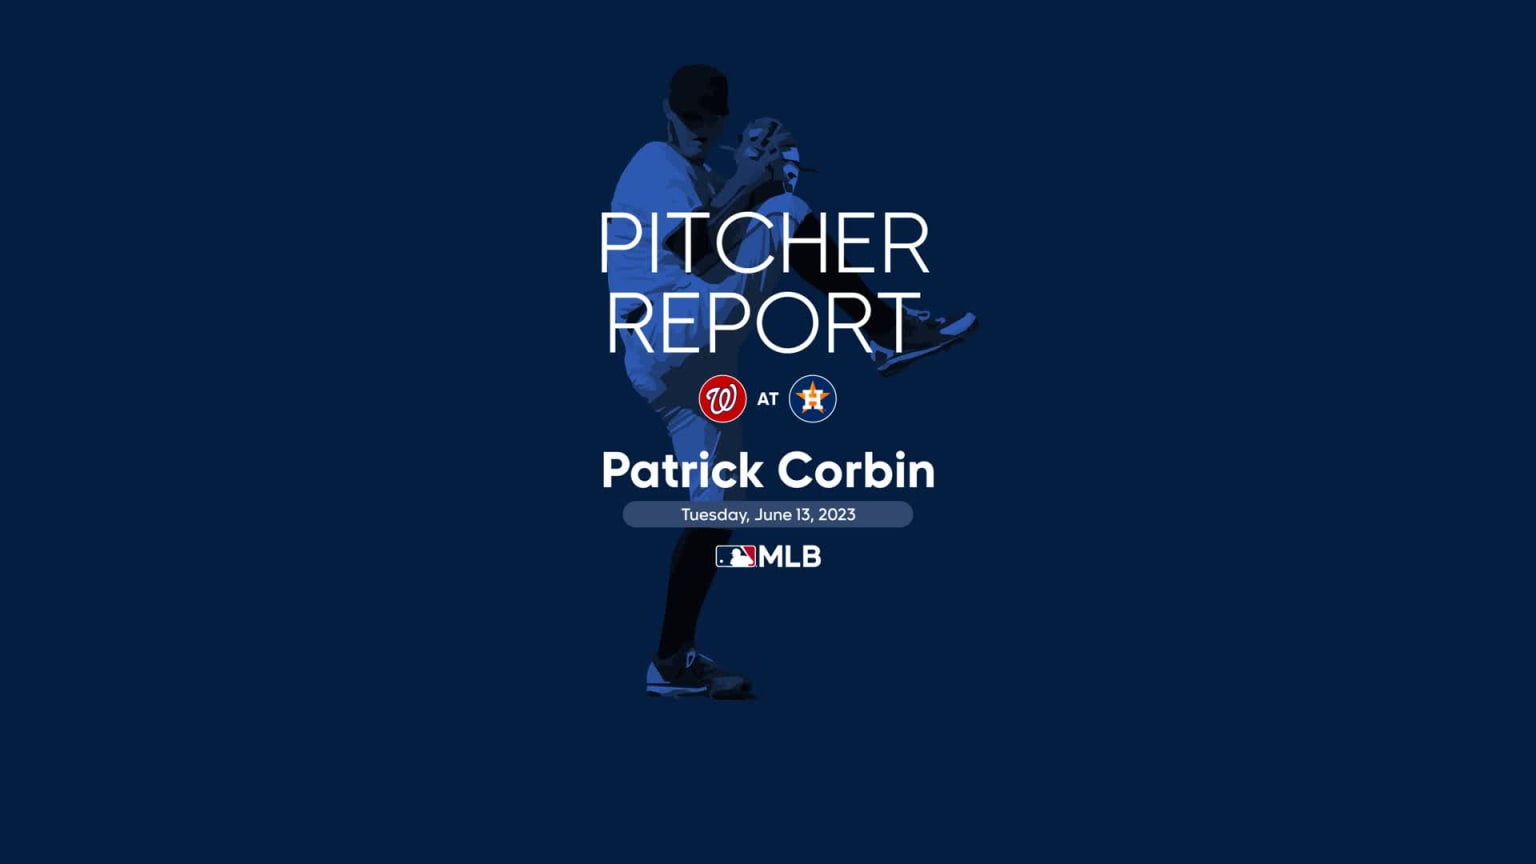 Patrick Corbin's outing against the Astros, 06/13/2023